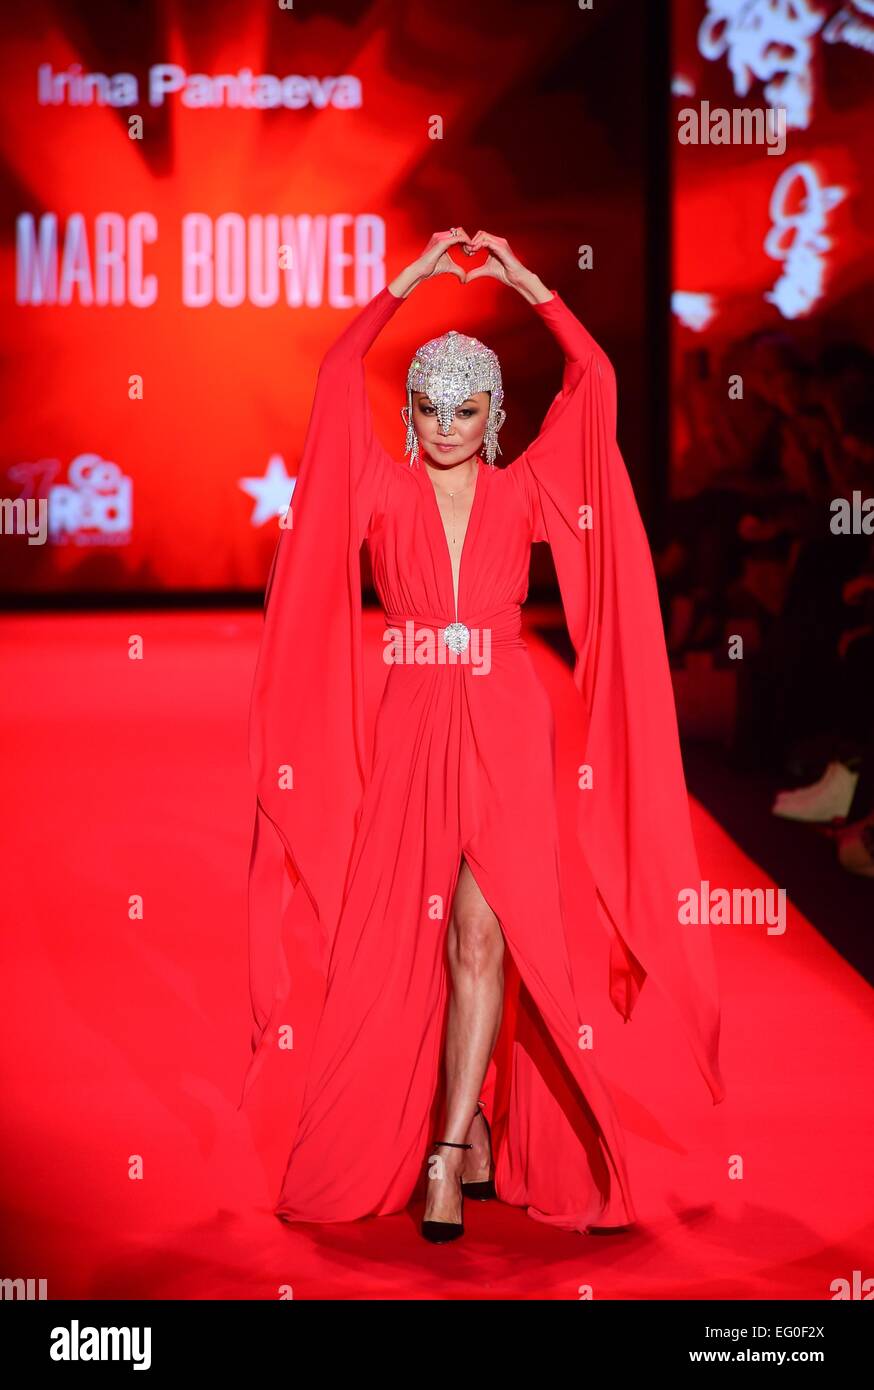 New York, NY, USA. 12th Feb, 2015. Irina Pantaeva on the runway for Go Red For Women Red Dress Collection 2015, The Theatre at Lincoln Center, New York, NY February 12, 2015. Credit:  Gregorio T. Binuya/Everett Collection/Alamy Live News Stock Photo